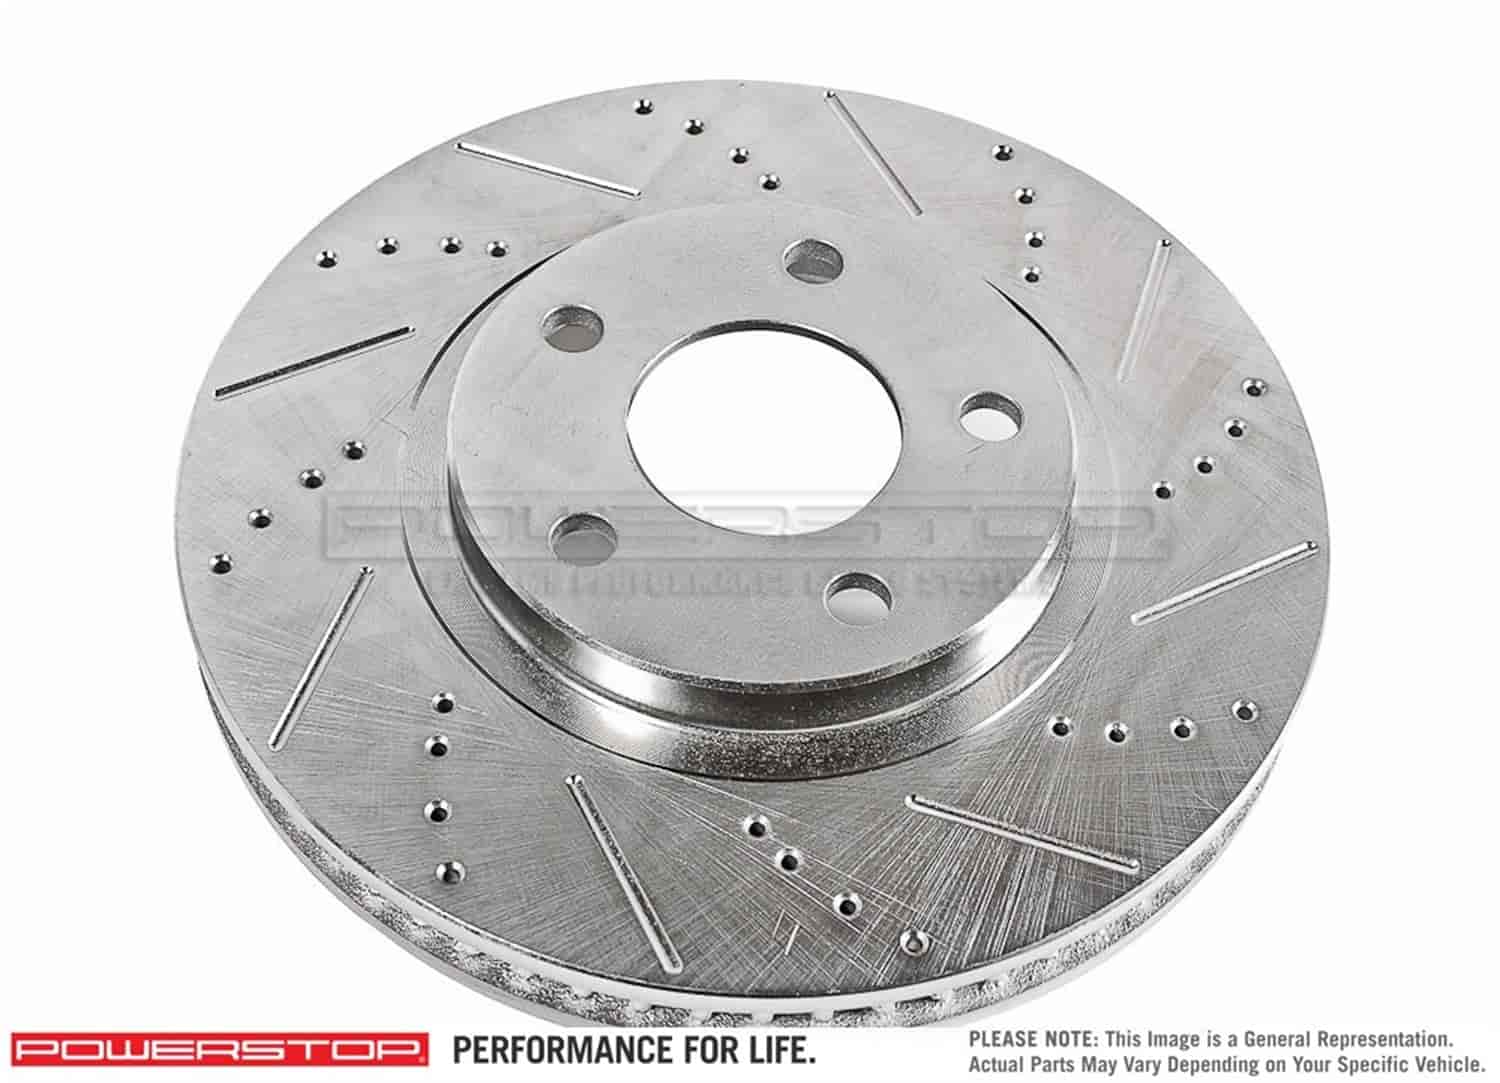 Power Stop Extreme Performance Drilled And Slotted Front Brake Rotors Fits Select 2005-2016 Ford Models [Right/Passenger Side]